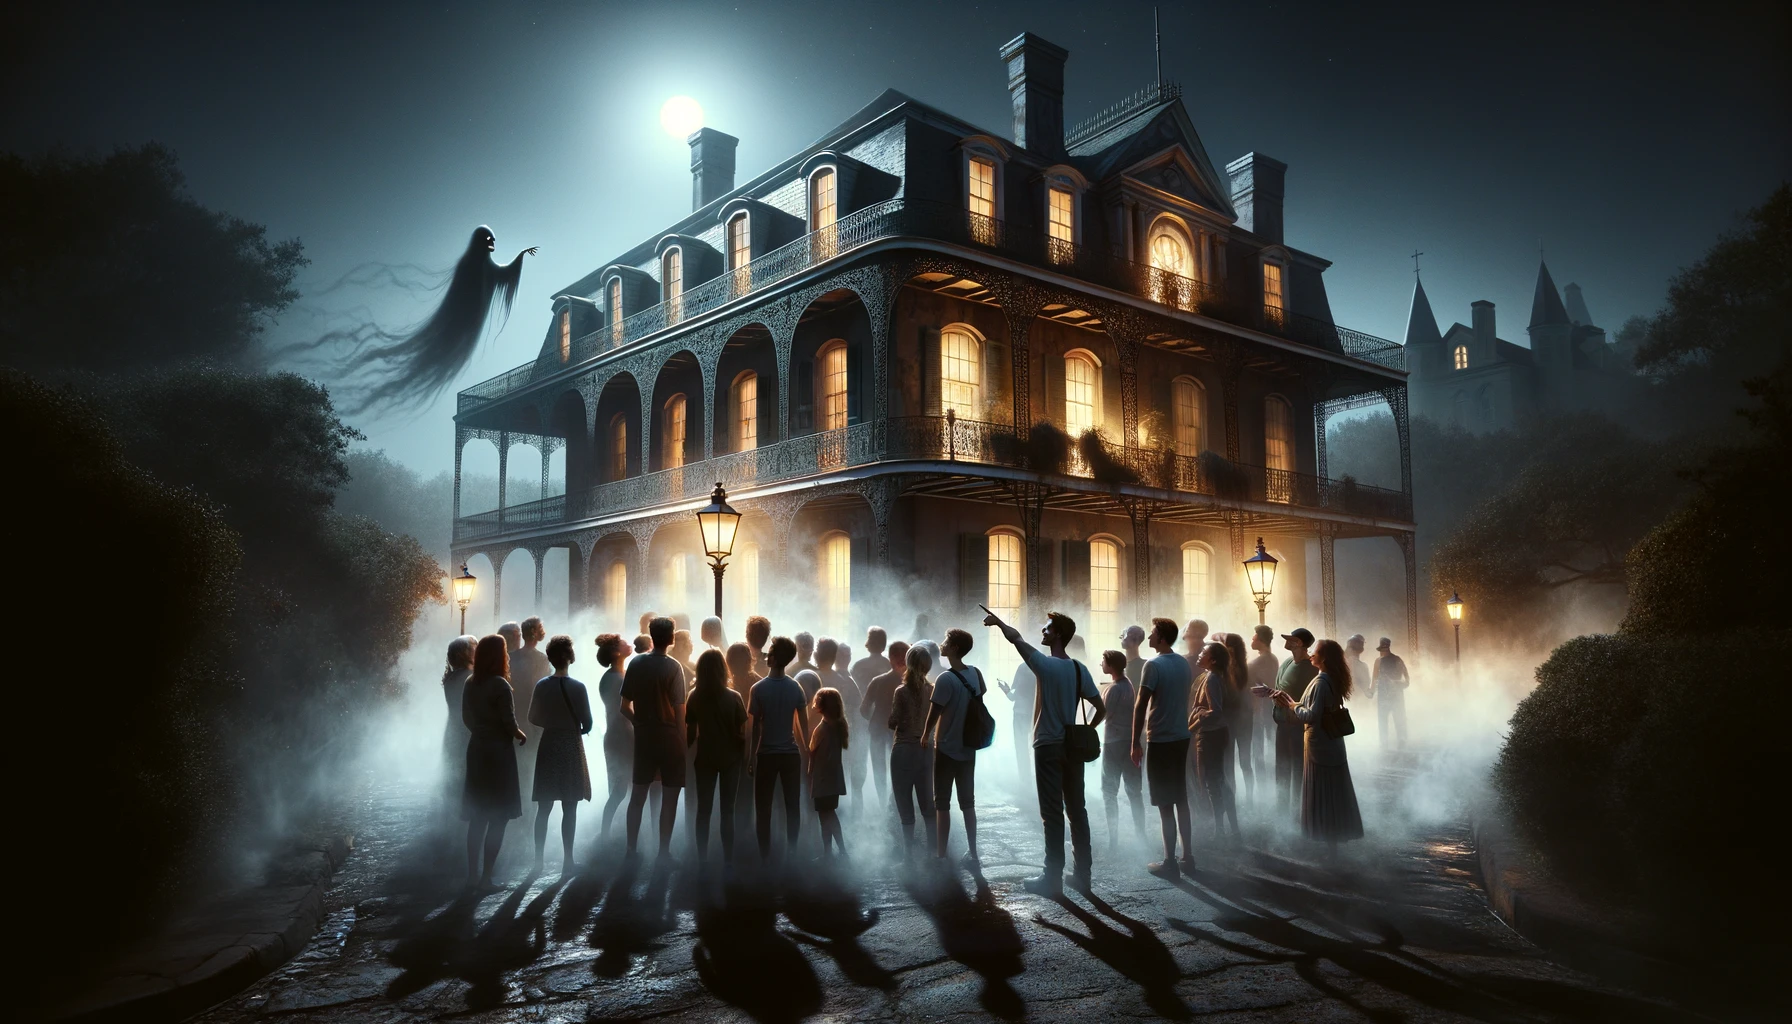 Ghost City Tours, the World's #1 Ghost Tour Company